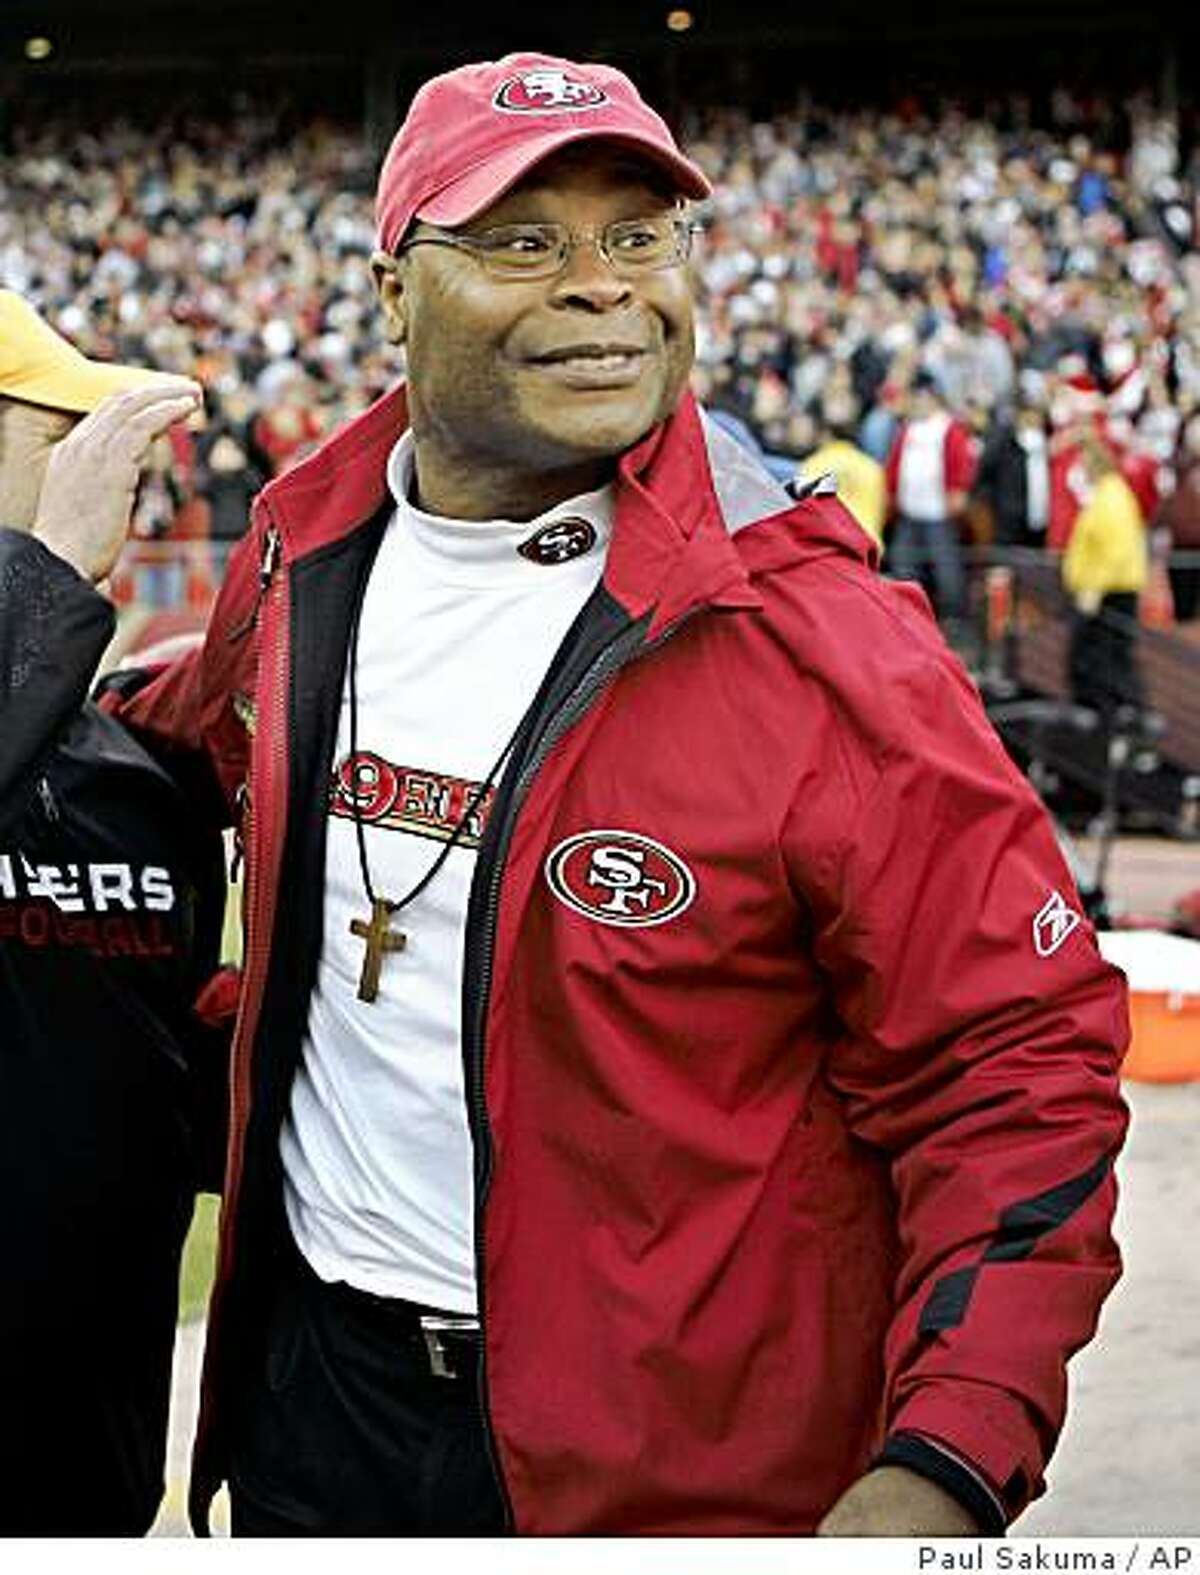 San Francisco 49ers head coach Mike Singletary smiles after the 49ers defeated the Washington Redskins 27-24 in a game in San Francisco, Sunday, Dec. 28, 2008.